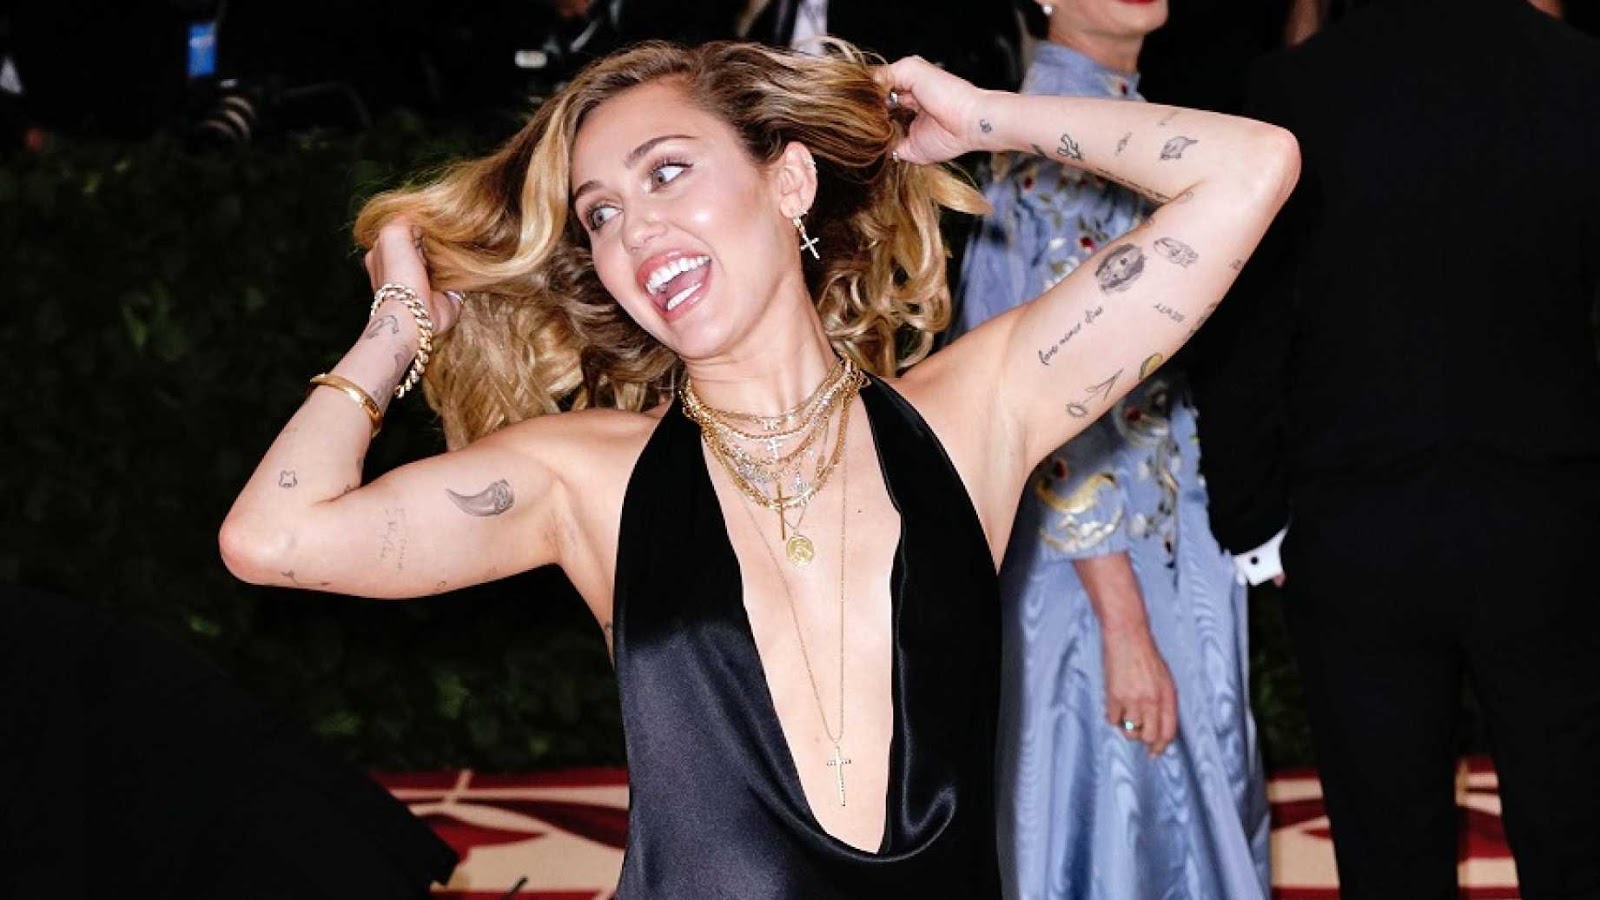 WATCH: Miley Cyrus Video Features Priests At Strip Club ...